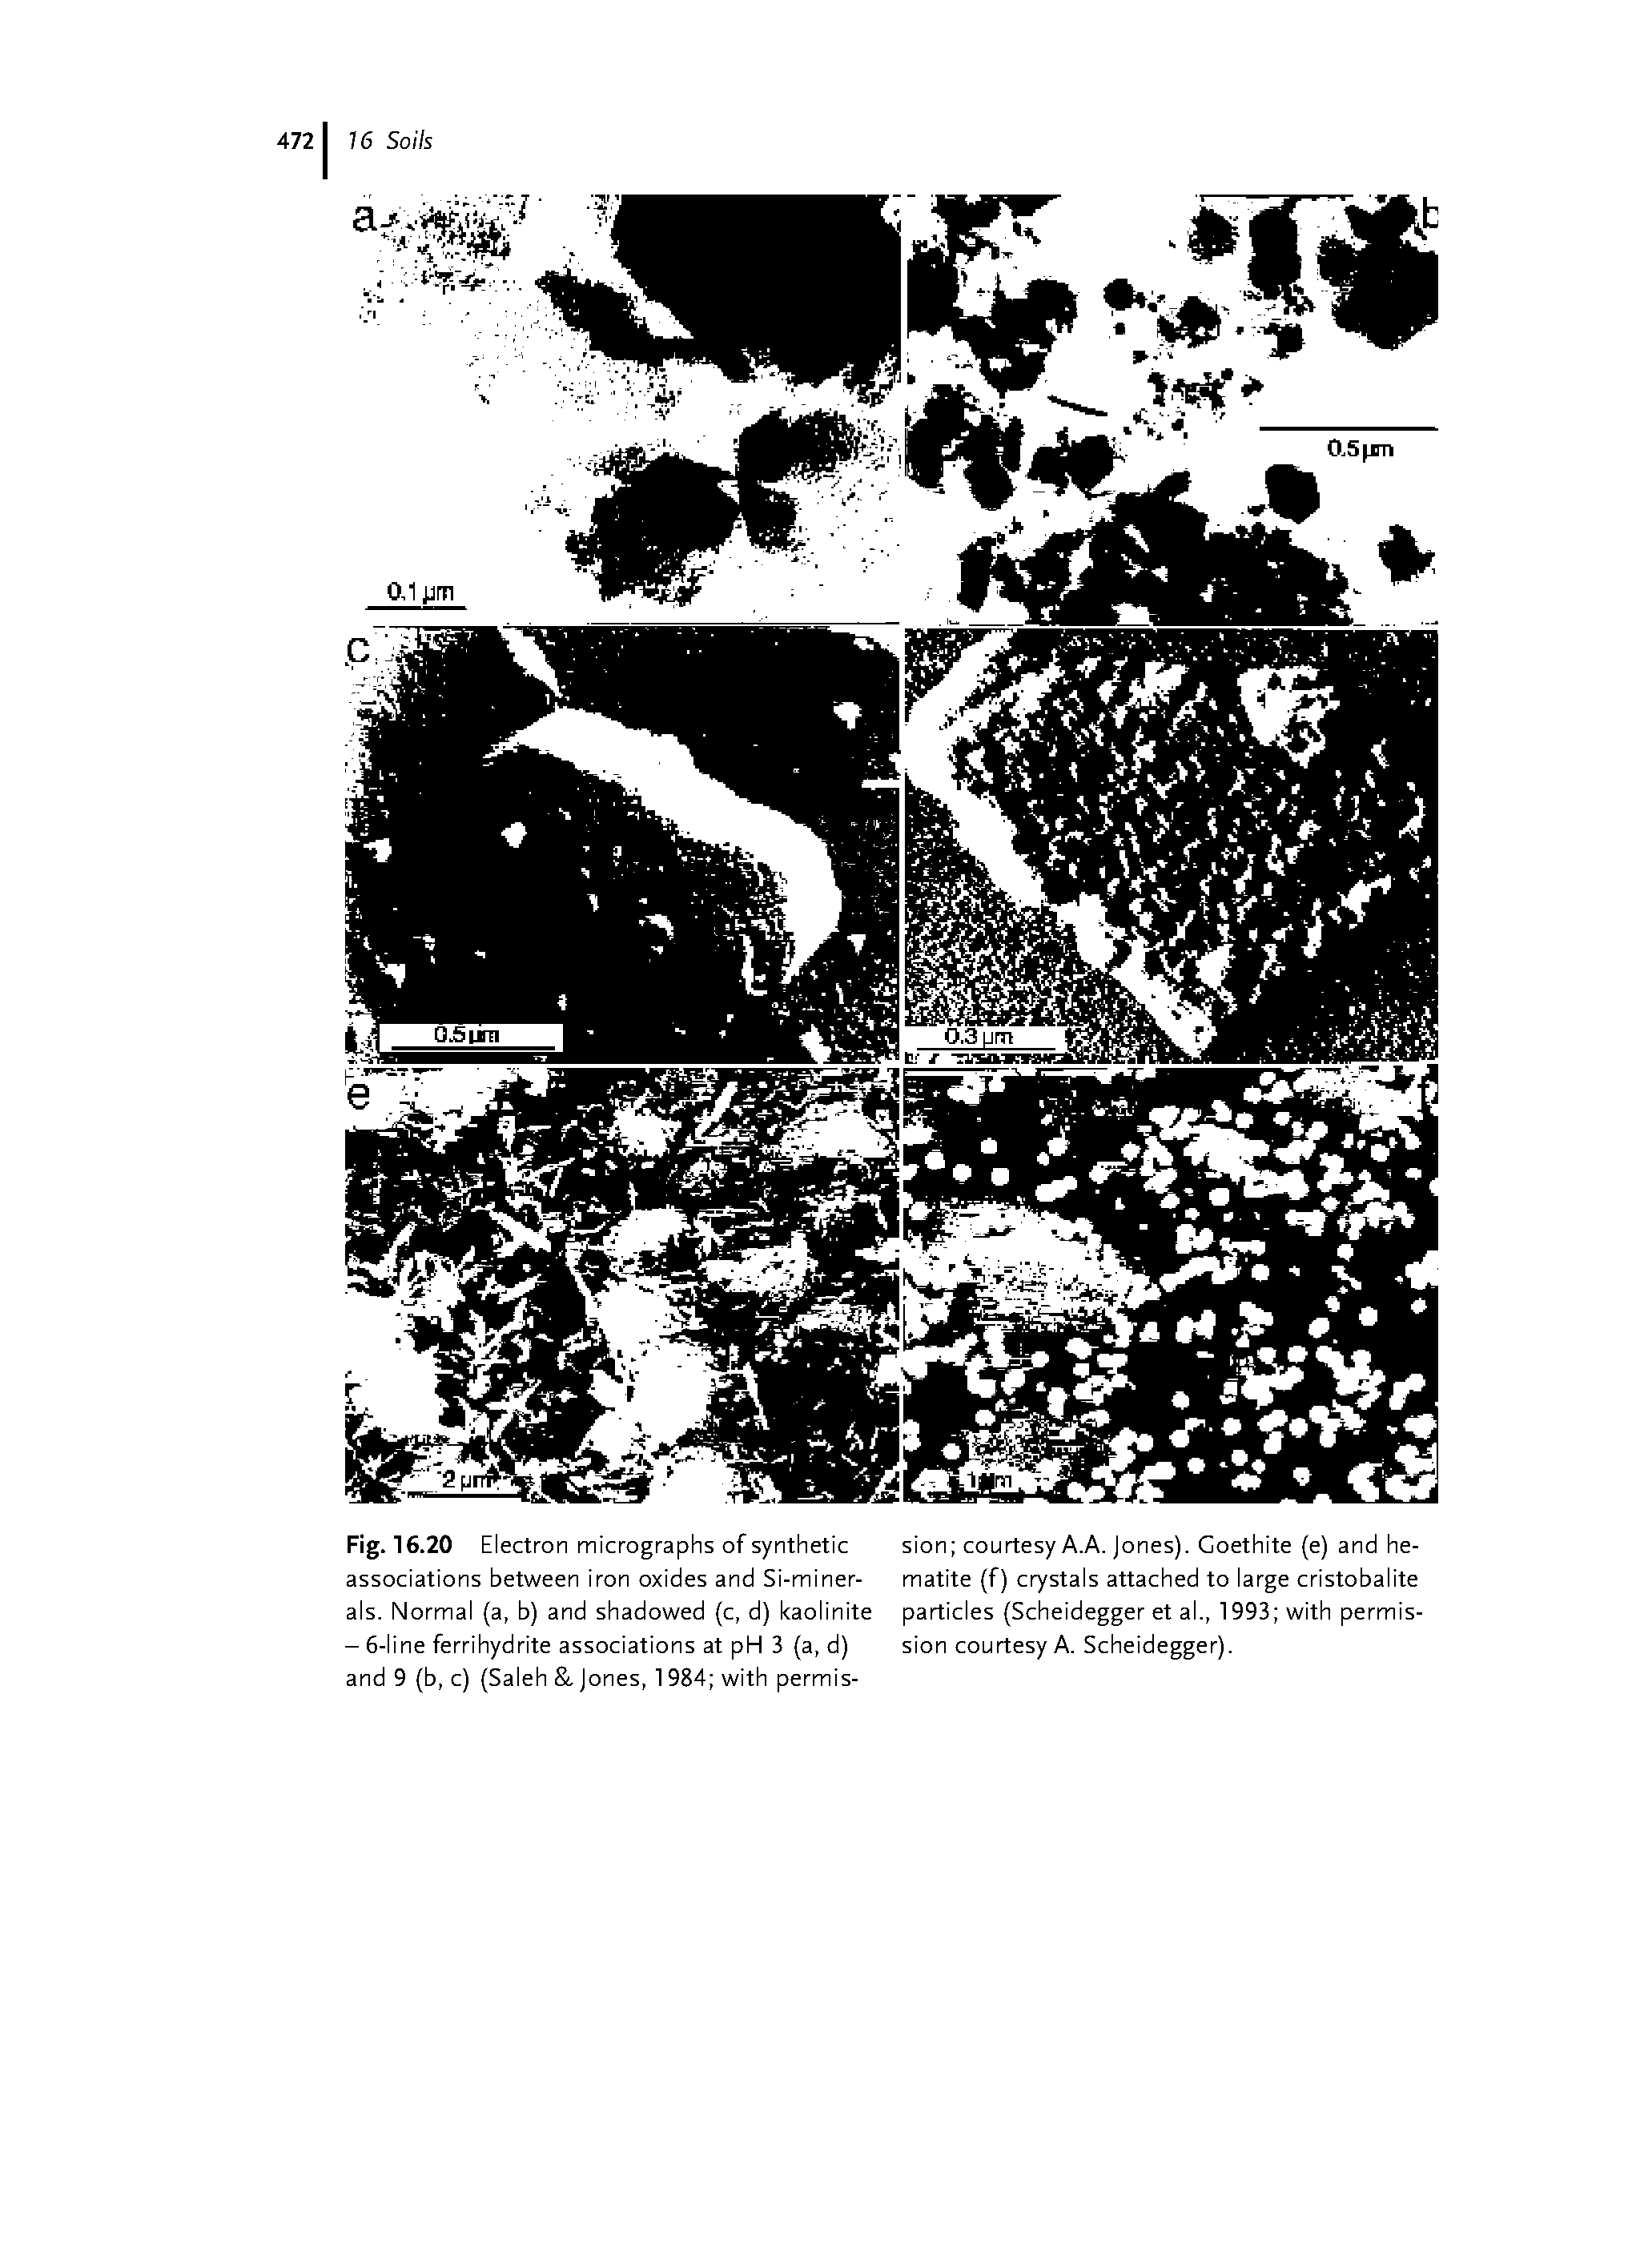 Fig. 16.20 Electron micrographs of synthetic associations between iron oxides and Si-miner-als. Normal (a, b) and shadowed (c, d) kaolinite - 6-line ferrihydrite associations at pH 3 (a, d) and 9 (b, c) (Saleh Jones, 1984 with permis-...